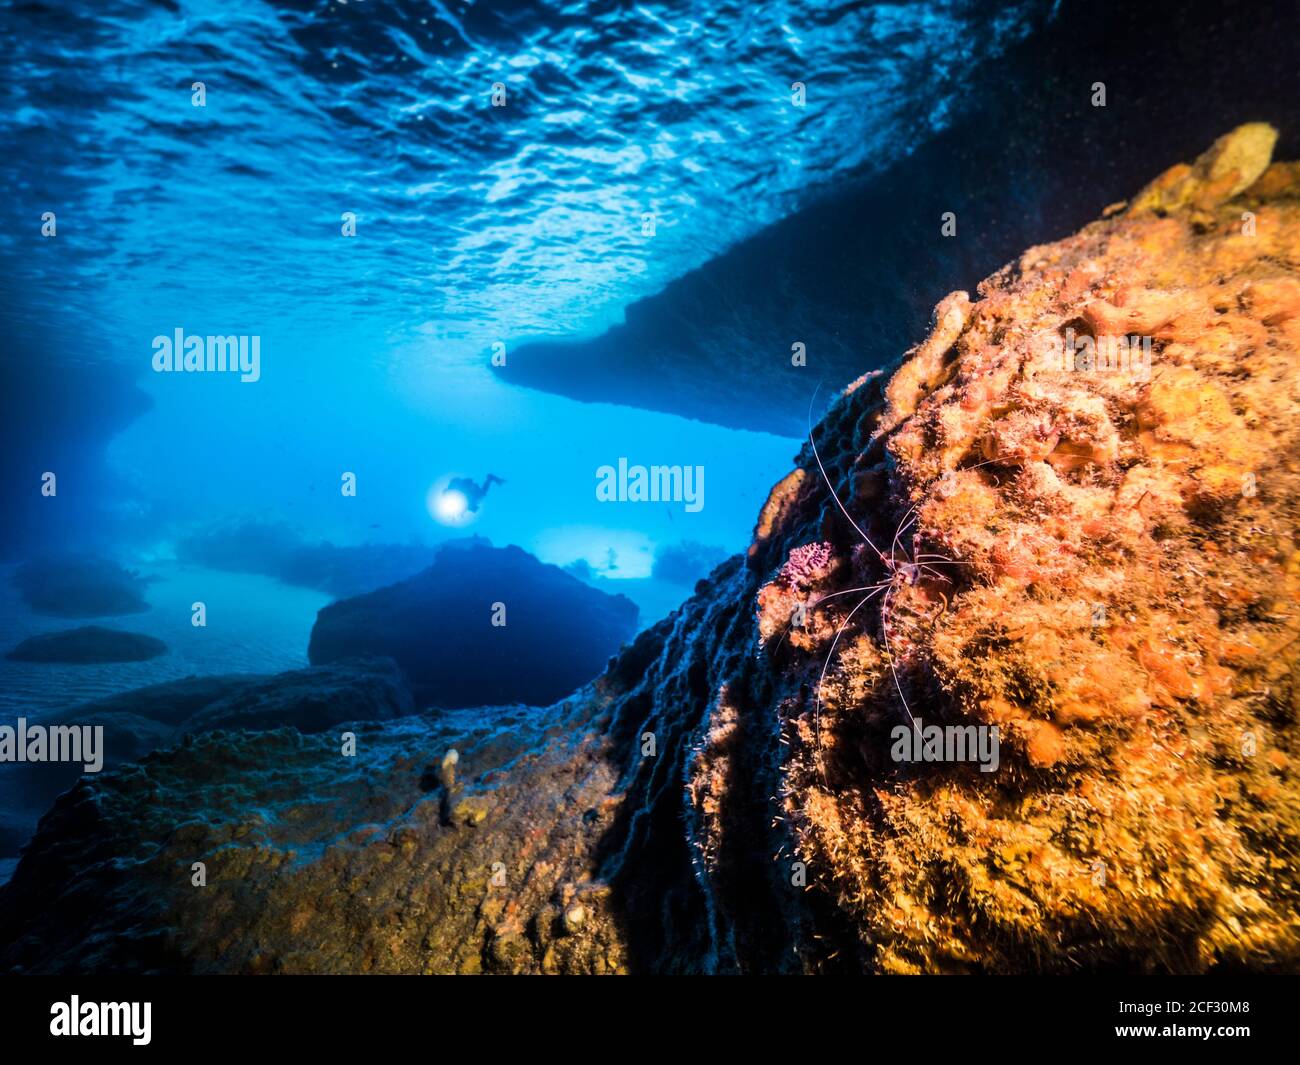 Seascape of coral reef in the Caribbean Sea / Curacao with Diver and Banded Coral Shrimp in cave 'Blue Room' Stock Photo